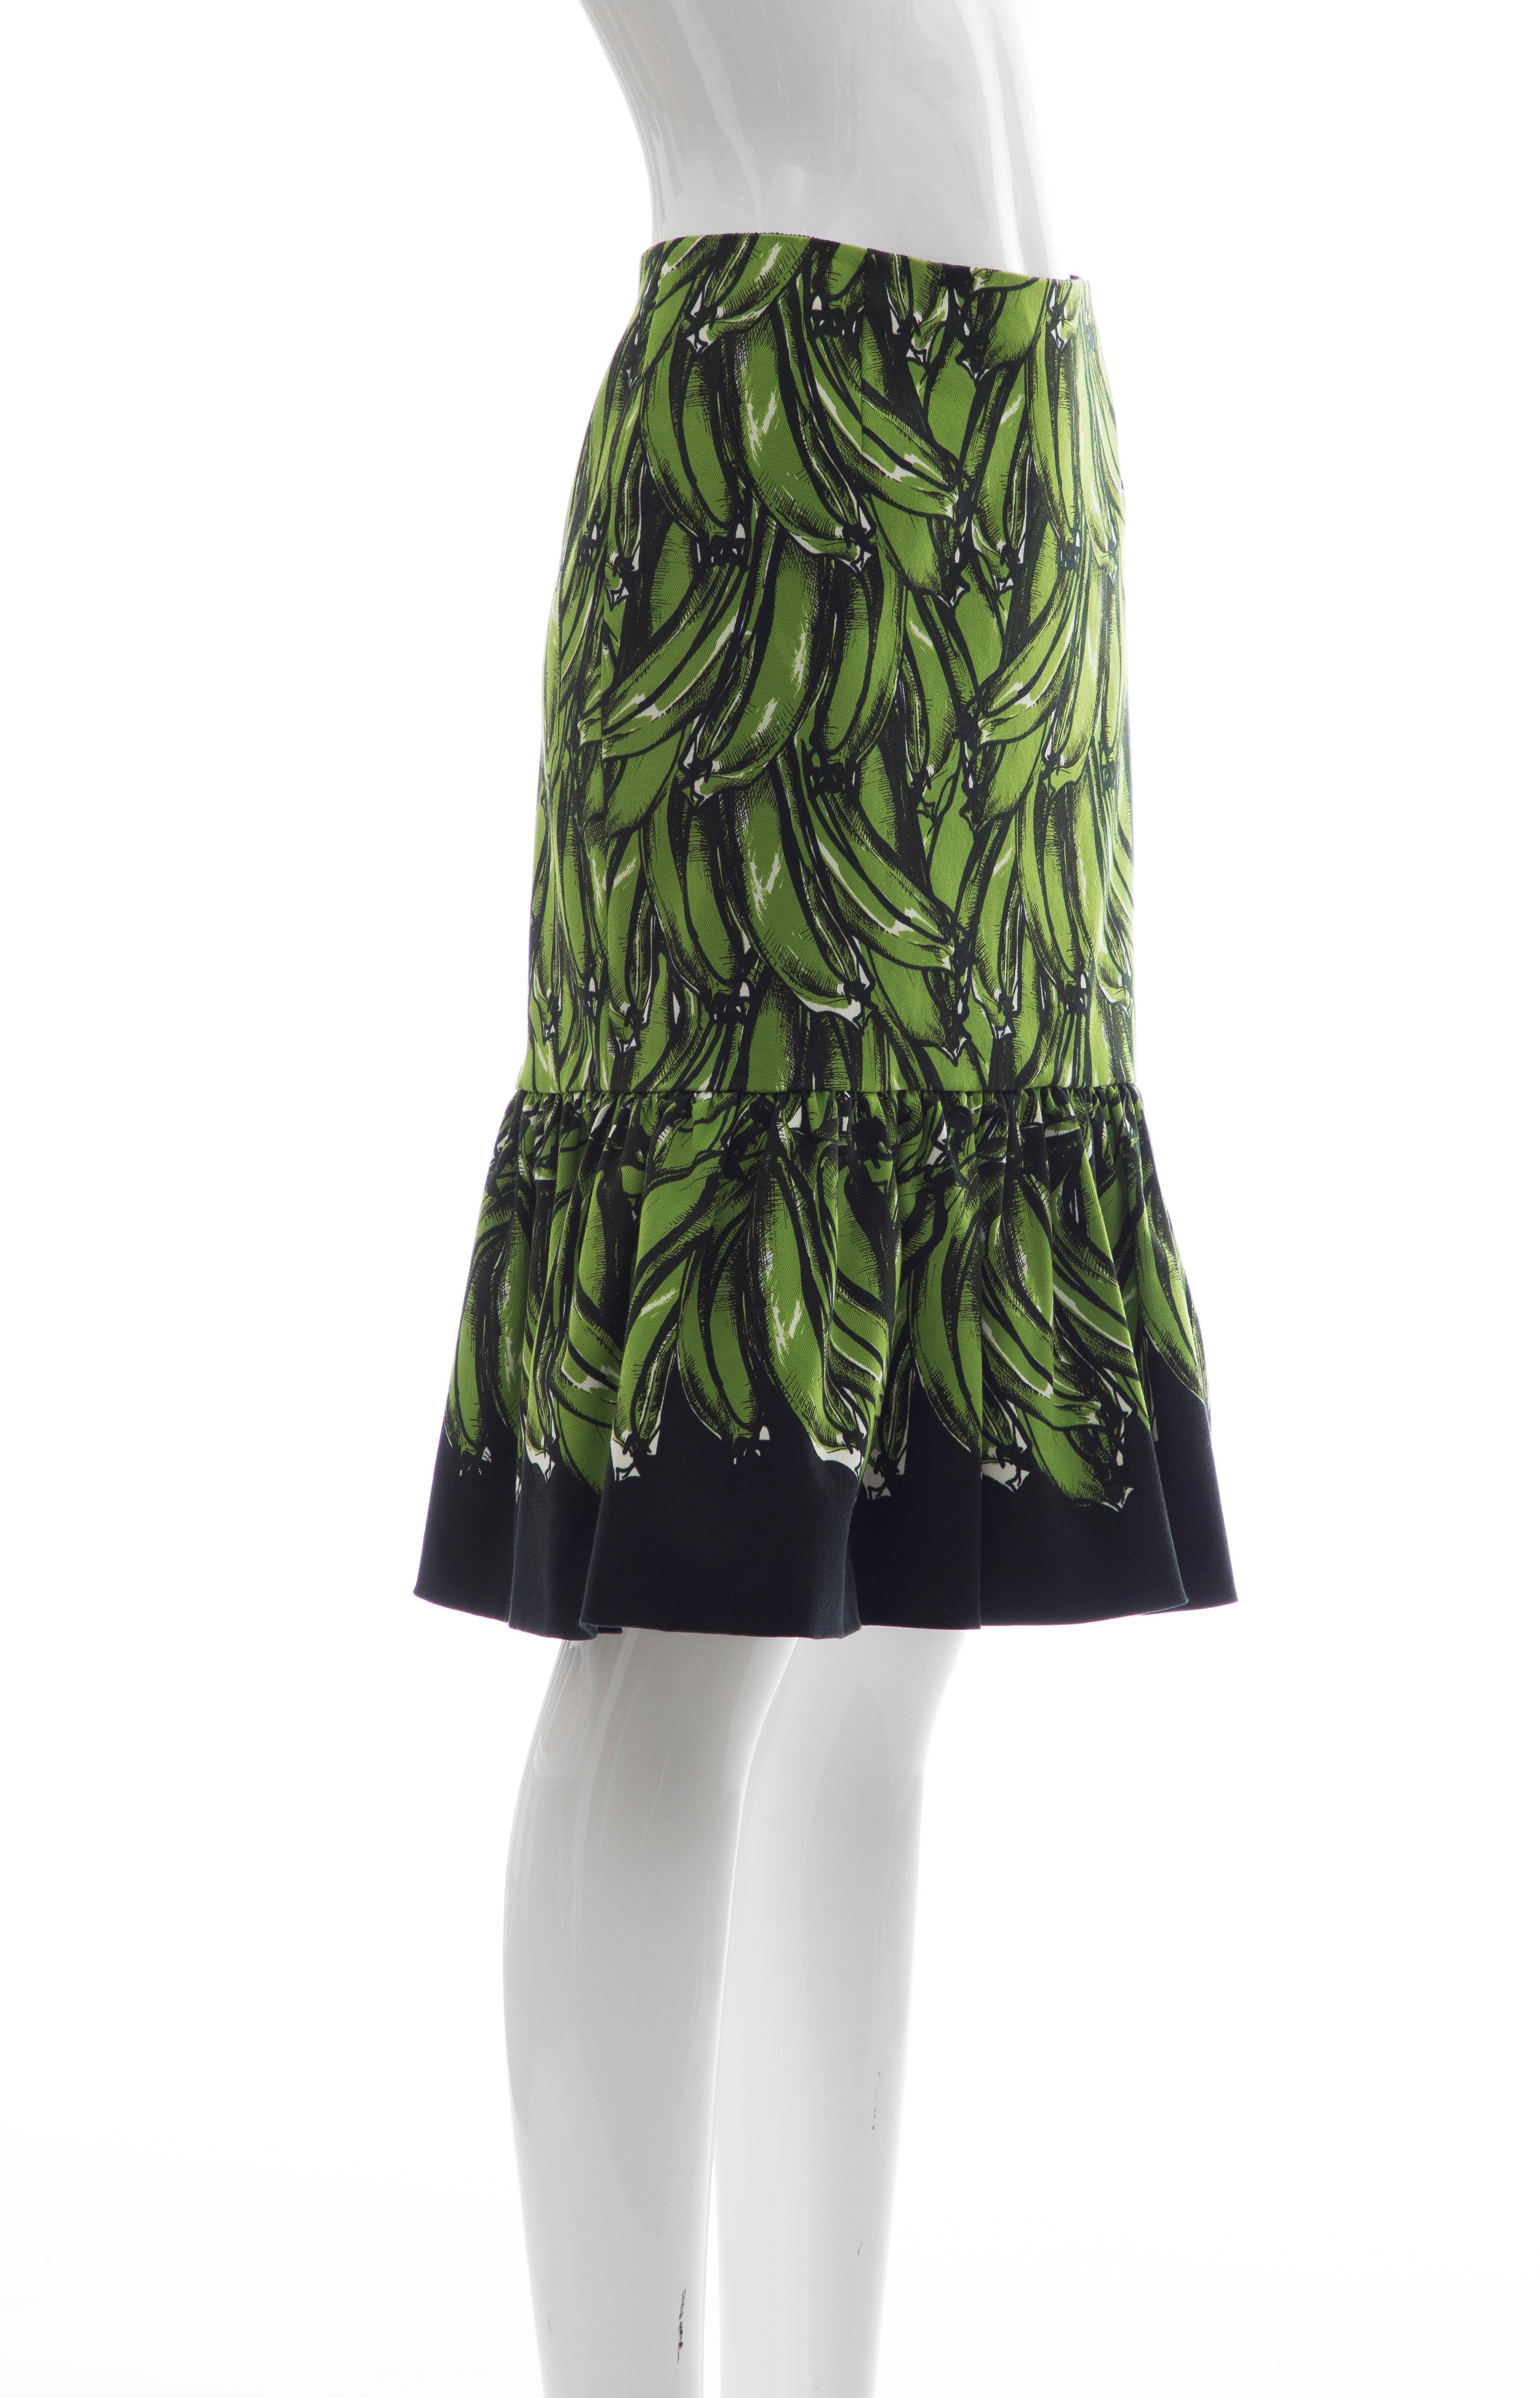 Prada, Spring-Summer 2011 black cotton with green plantains print skirt with flared hem and invisible zip closure at side seam

IT. 42, US. 6

Waist 26, Hips 17, Length 24